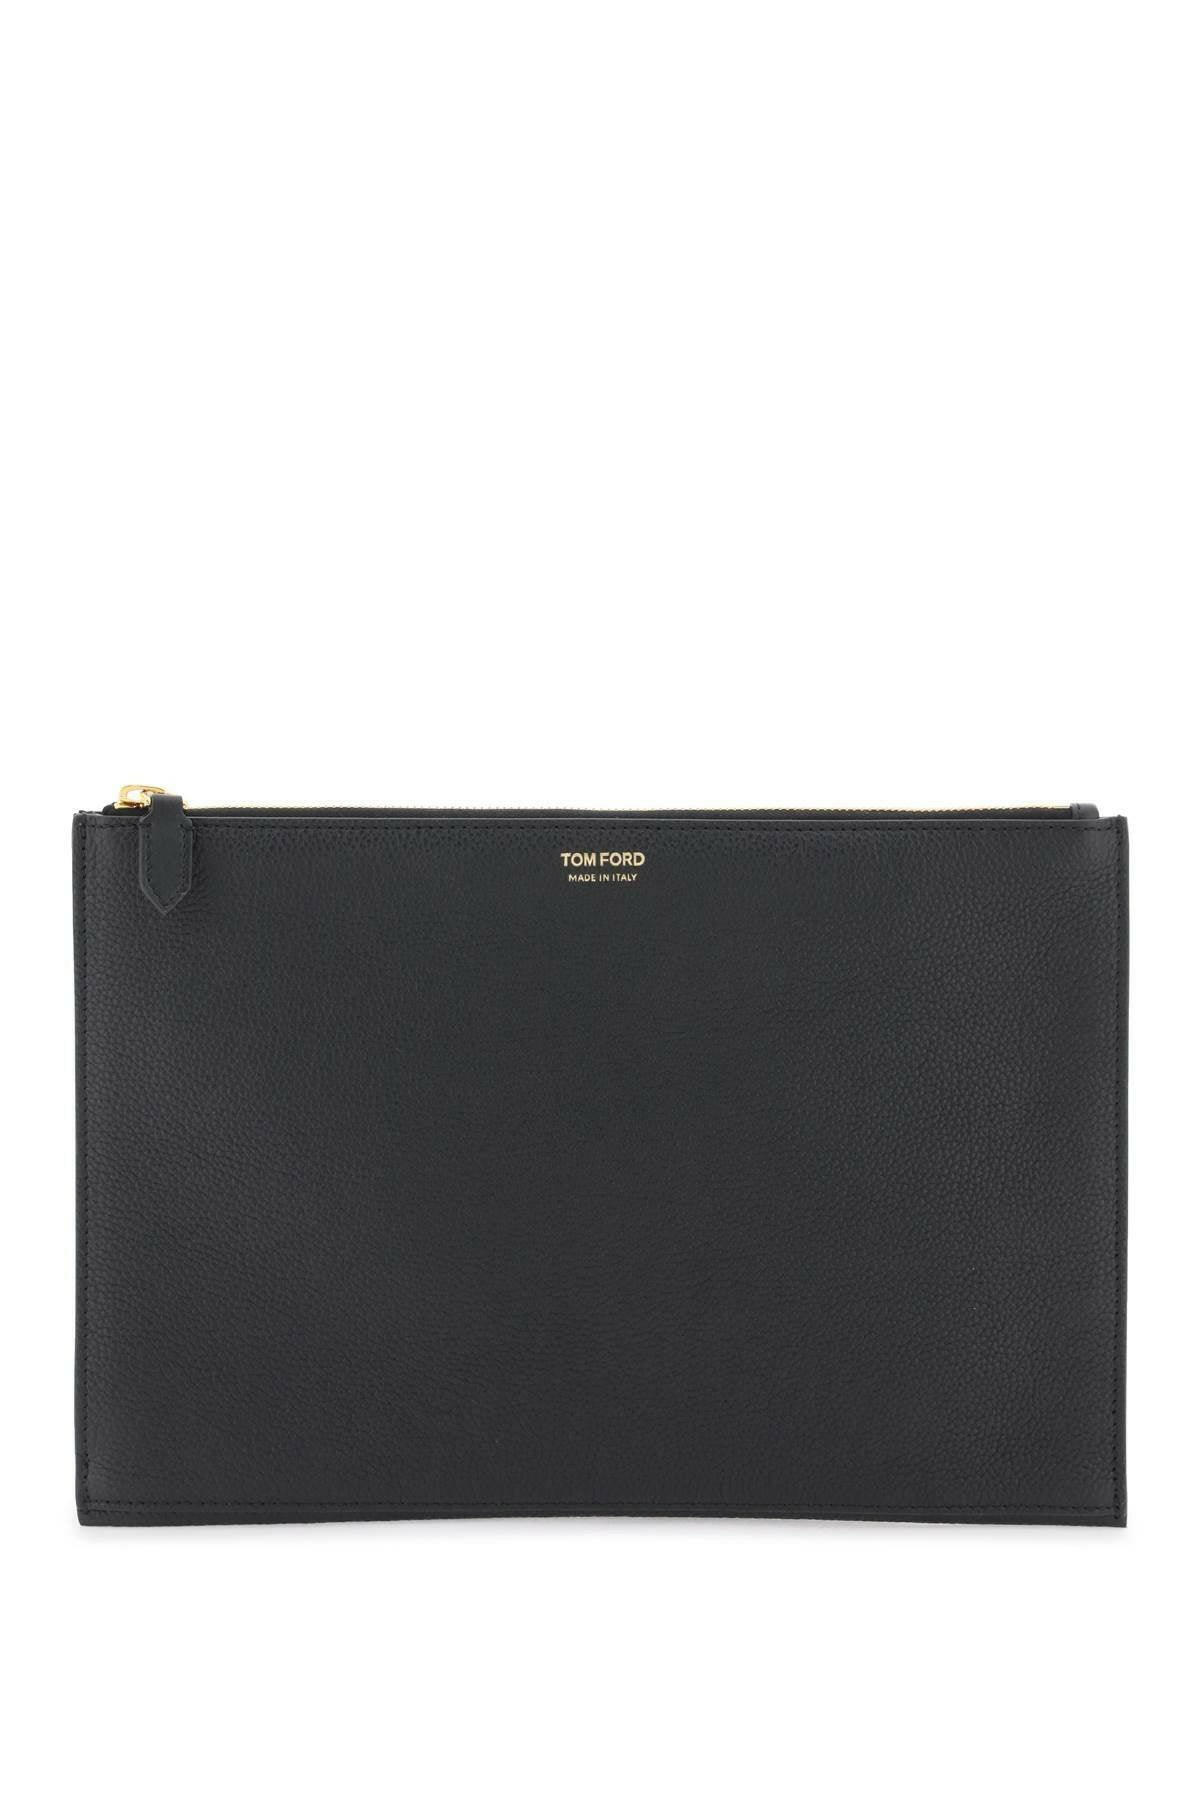 Tom Ford Grained Leather Pouch - JOHN JULIA